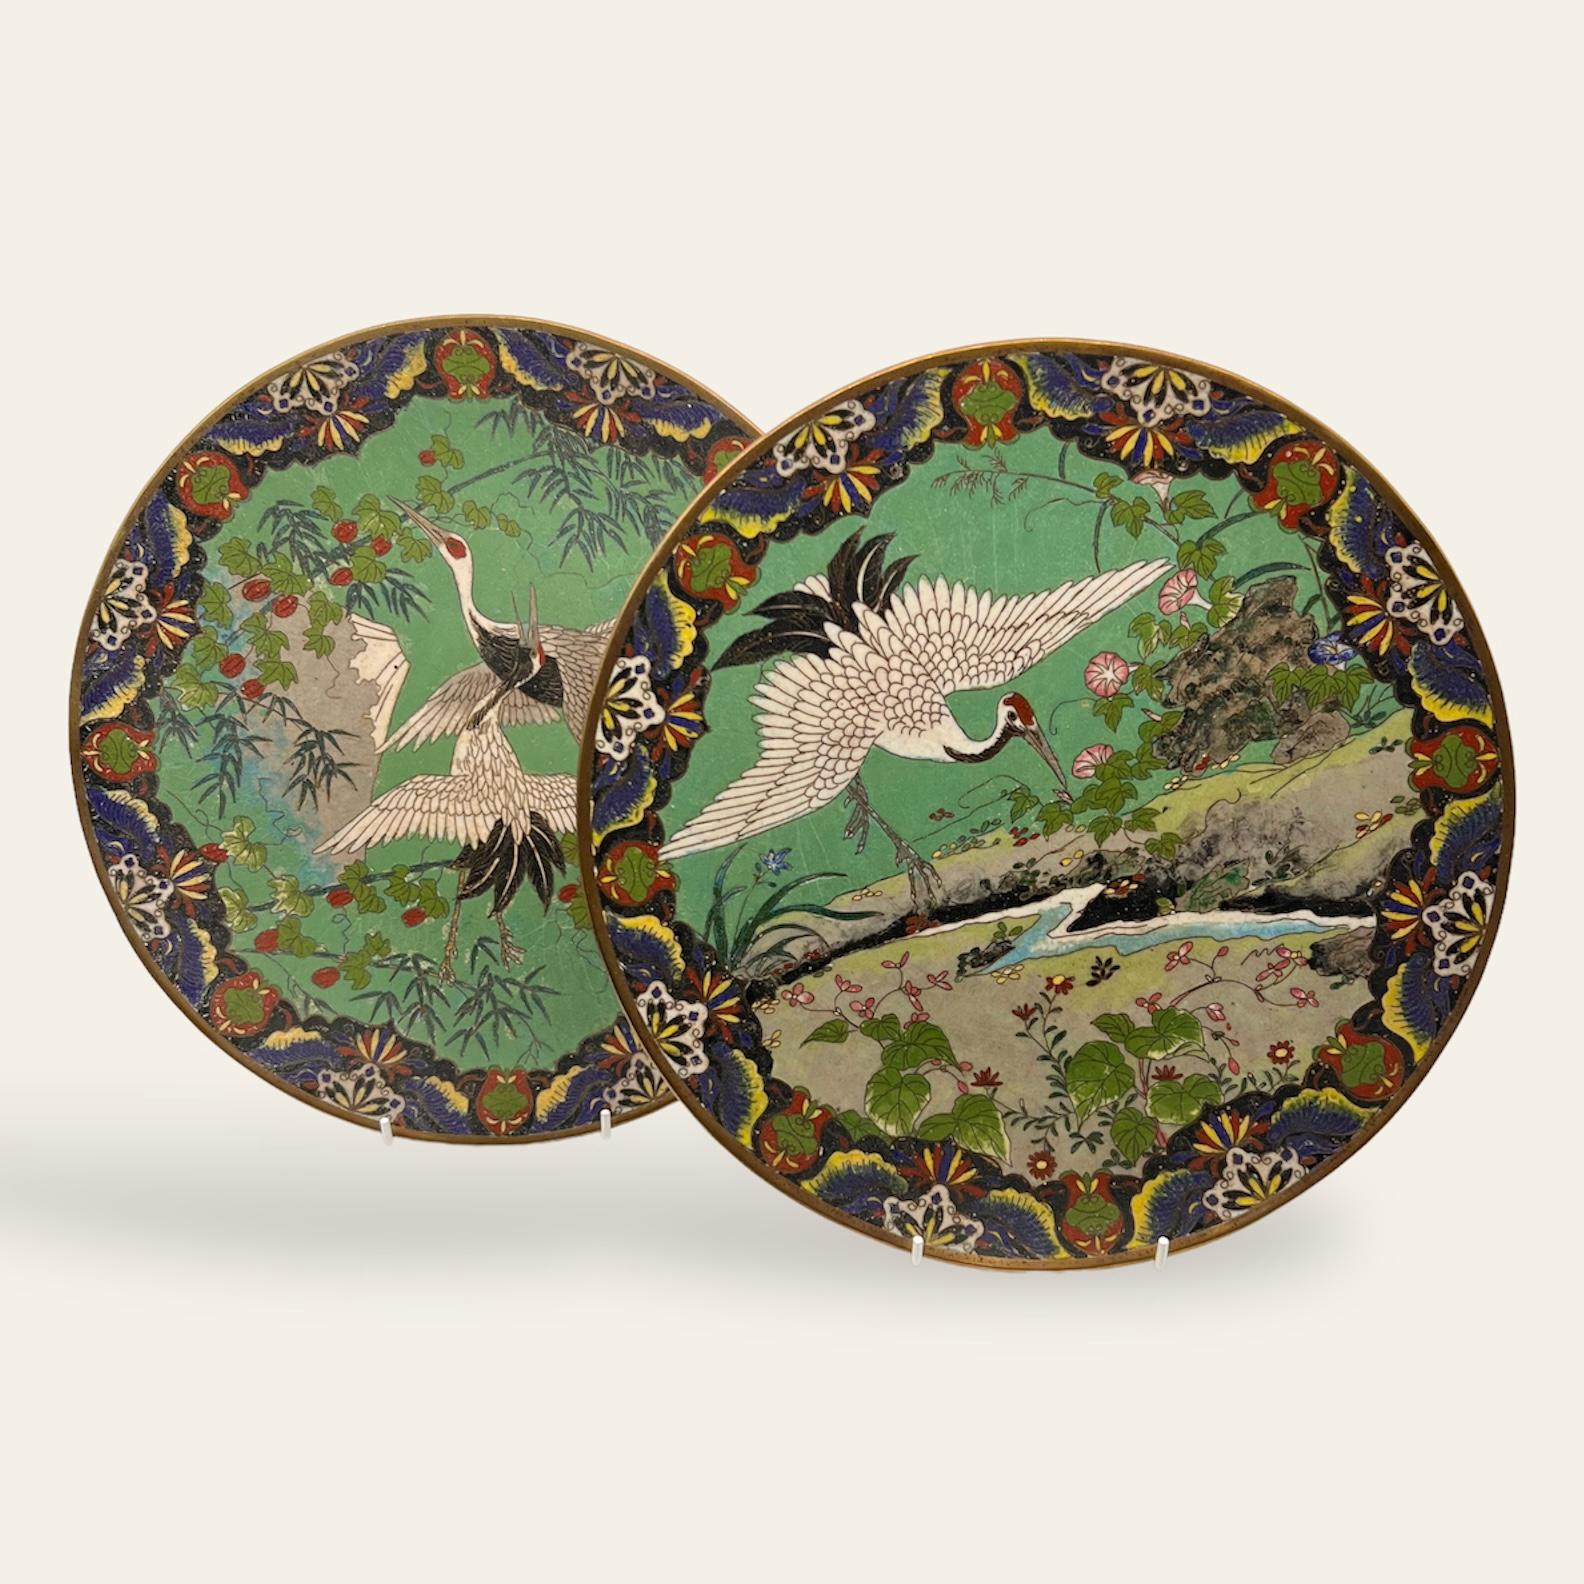 A 19th C exquisite and highly decorative pair of Japanese Cloisonne chargers in rare imperial emerald green background to frame a beautiful white cranes amongst pink and red flowers , vines and foliage. Vary auspicious with a detailed pattern around